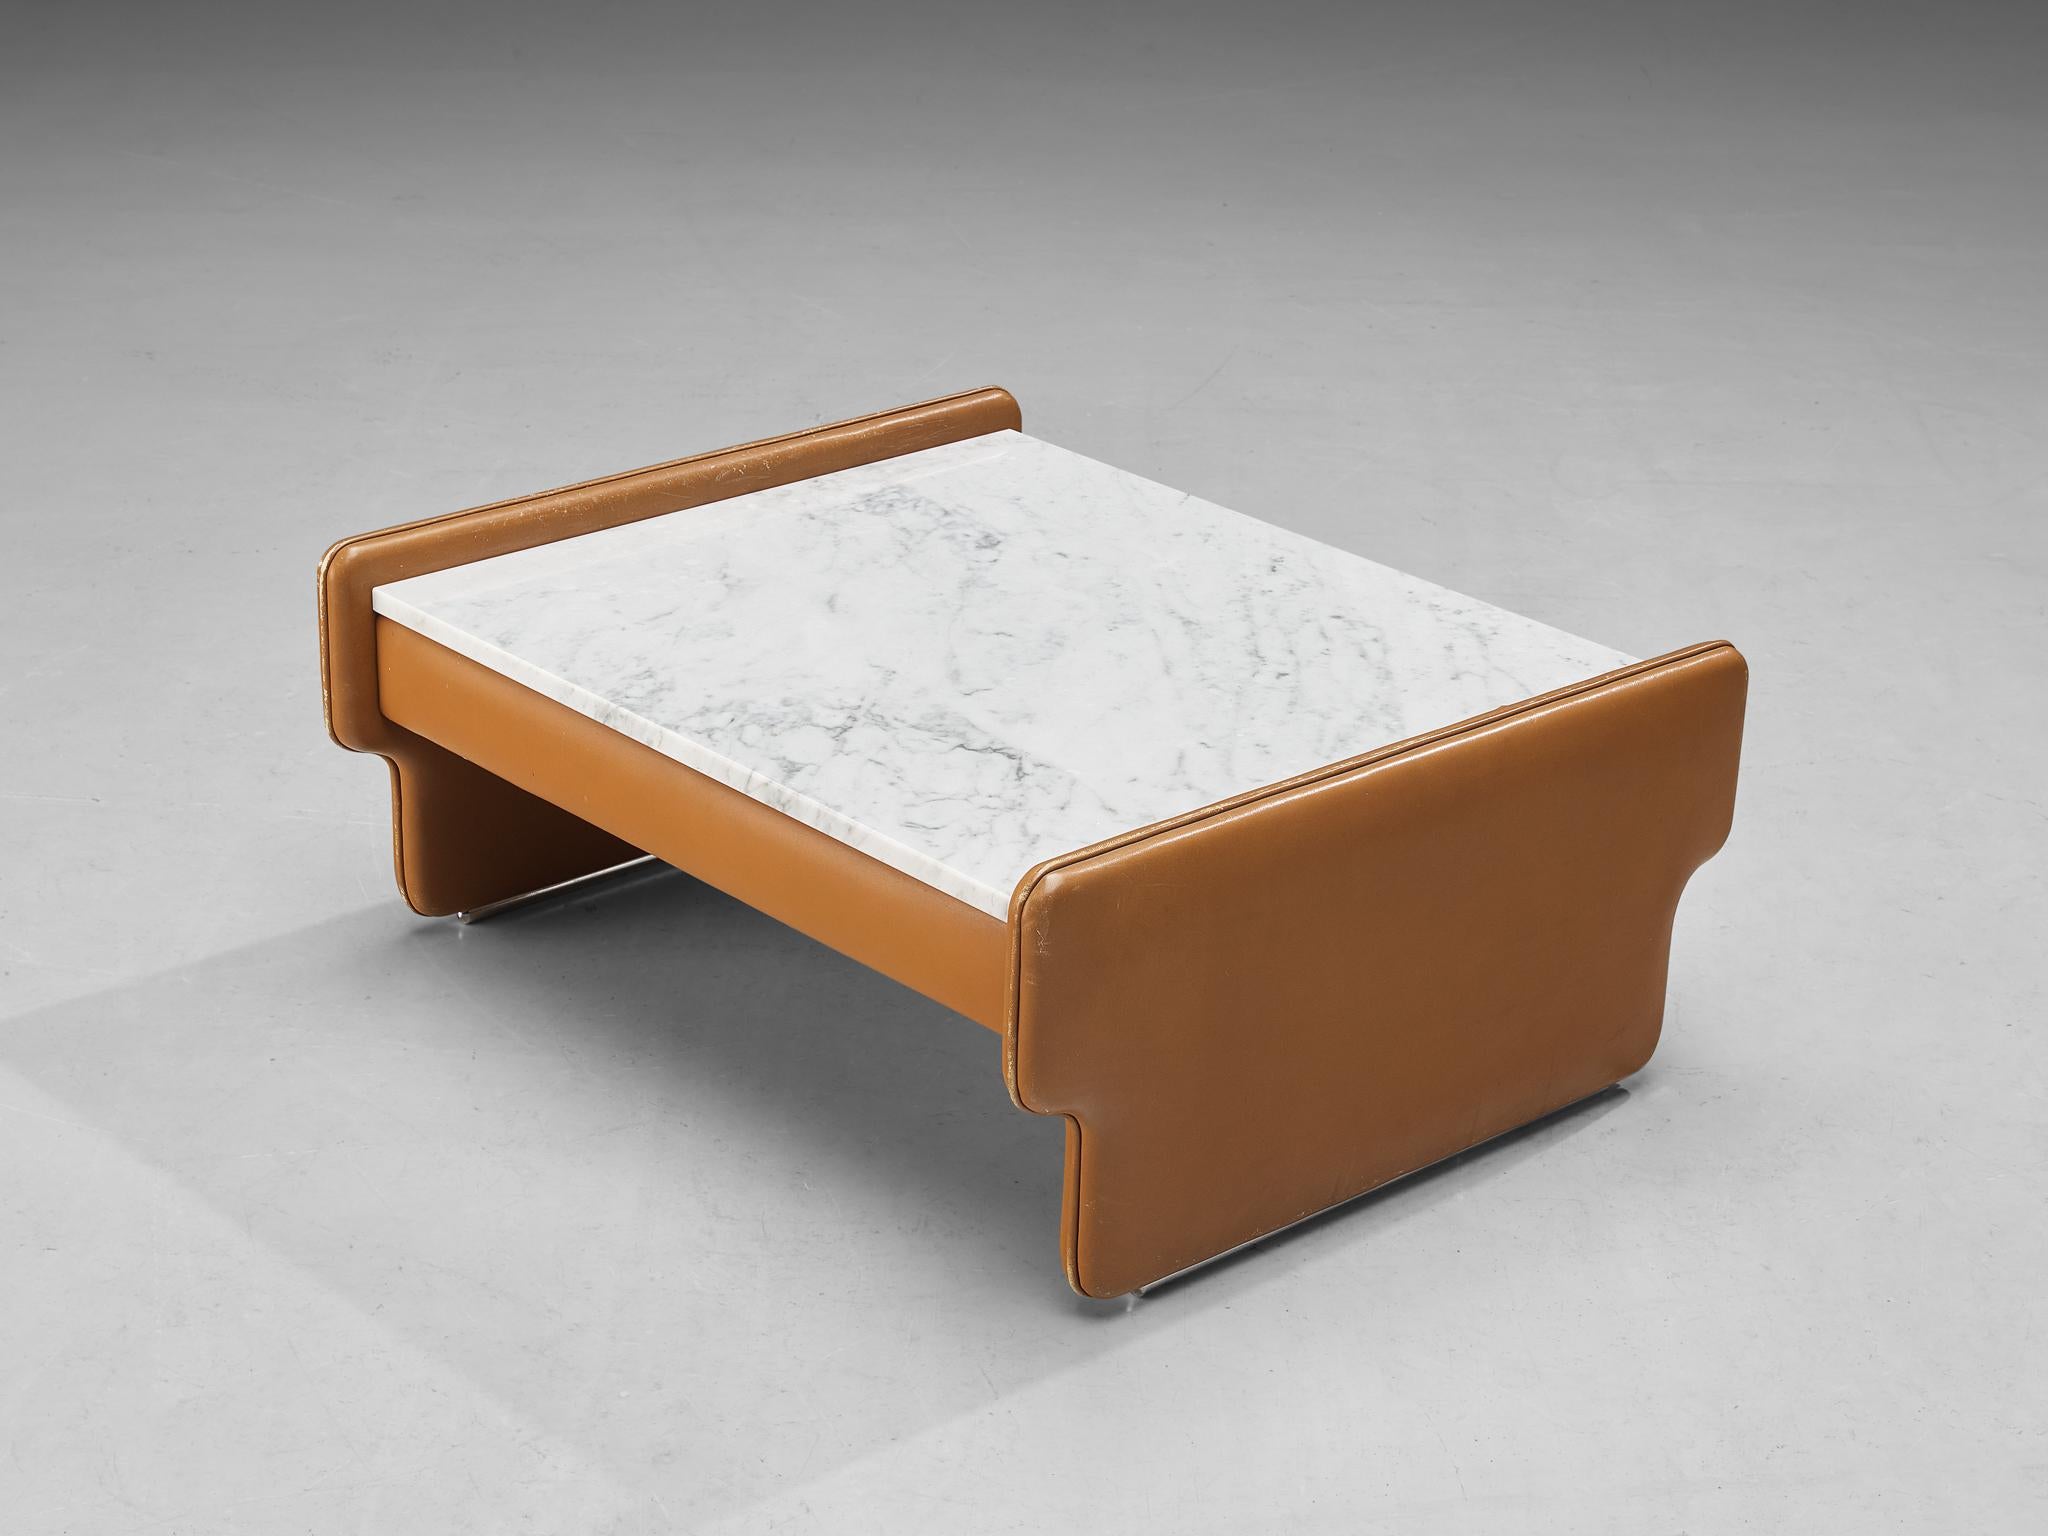 Coffee table, leather, marble, Italy, 1970s. 

This coffee table truly radiates Italian design of the seventies. The use of soft cognac leather combined with striking geometric forms is highly notable and characteristic for that era. The outer frame